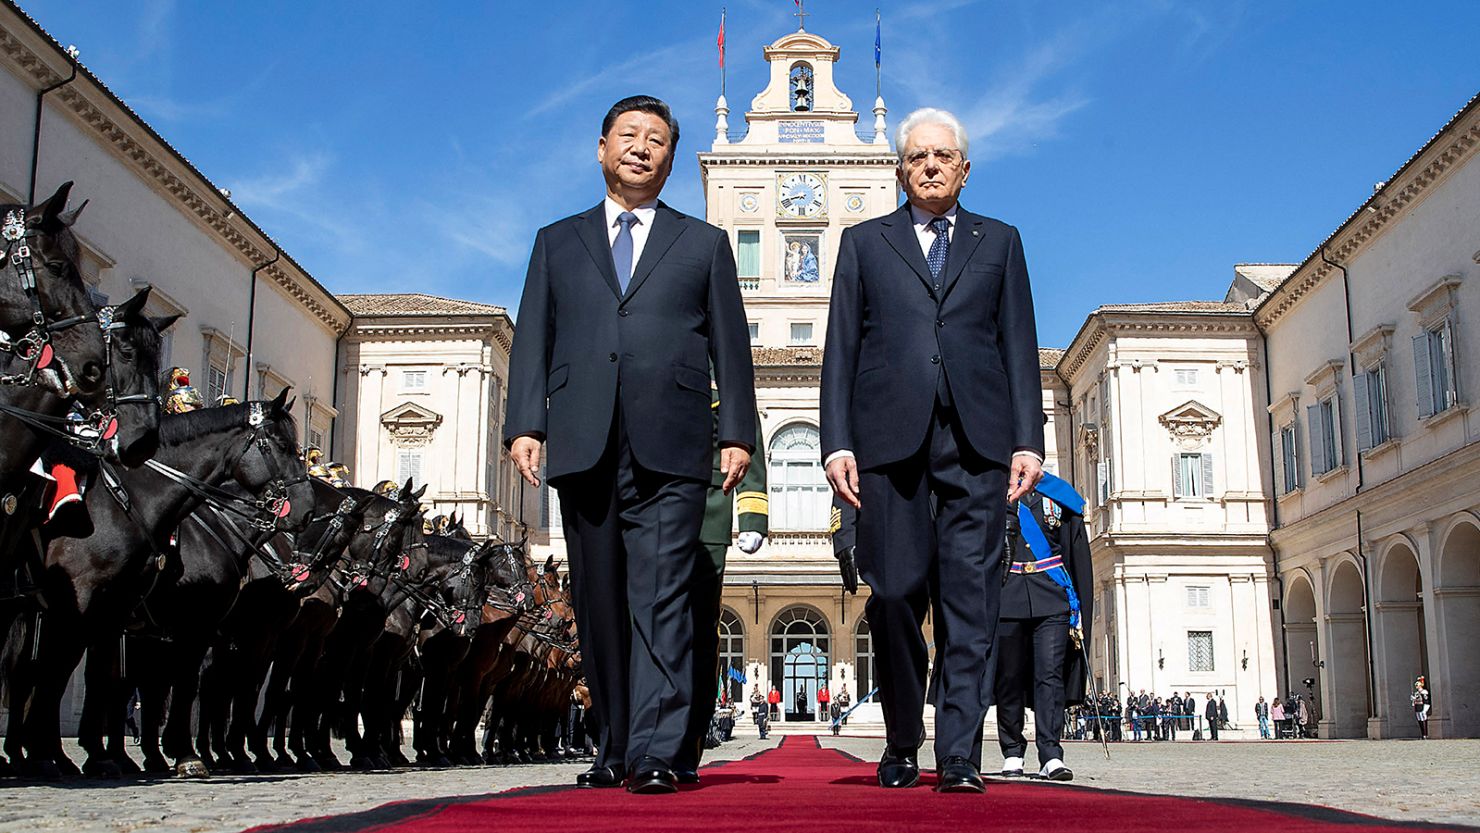 Italian President Sergio Mattarella and Chinese leader Xi Jinping at the Quirinale presidential palace in Rome, Italy, on March 23, 2019.